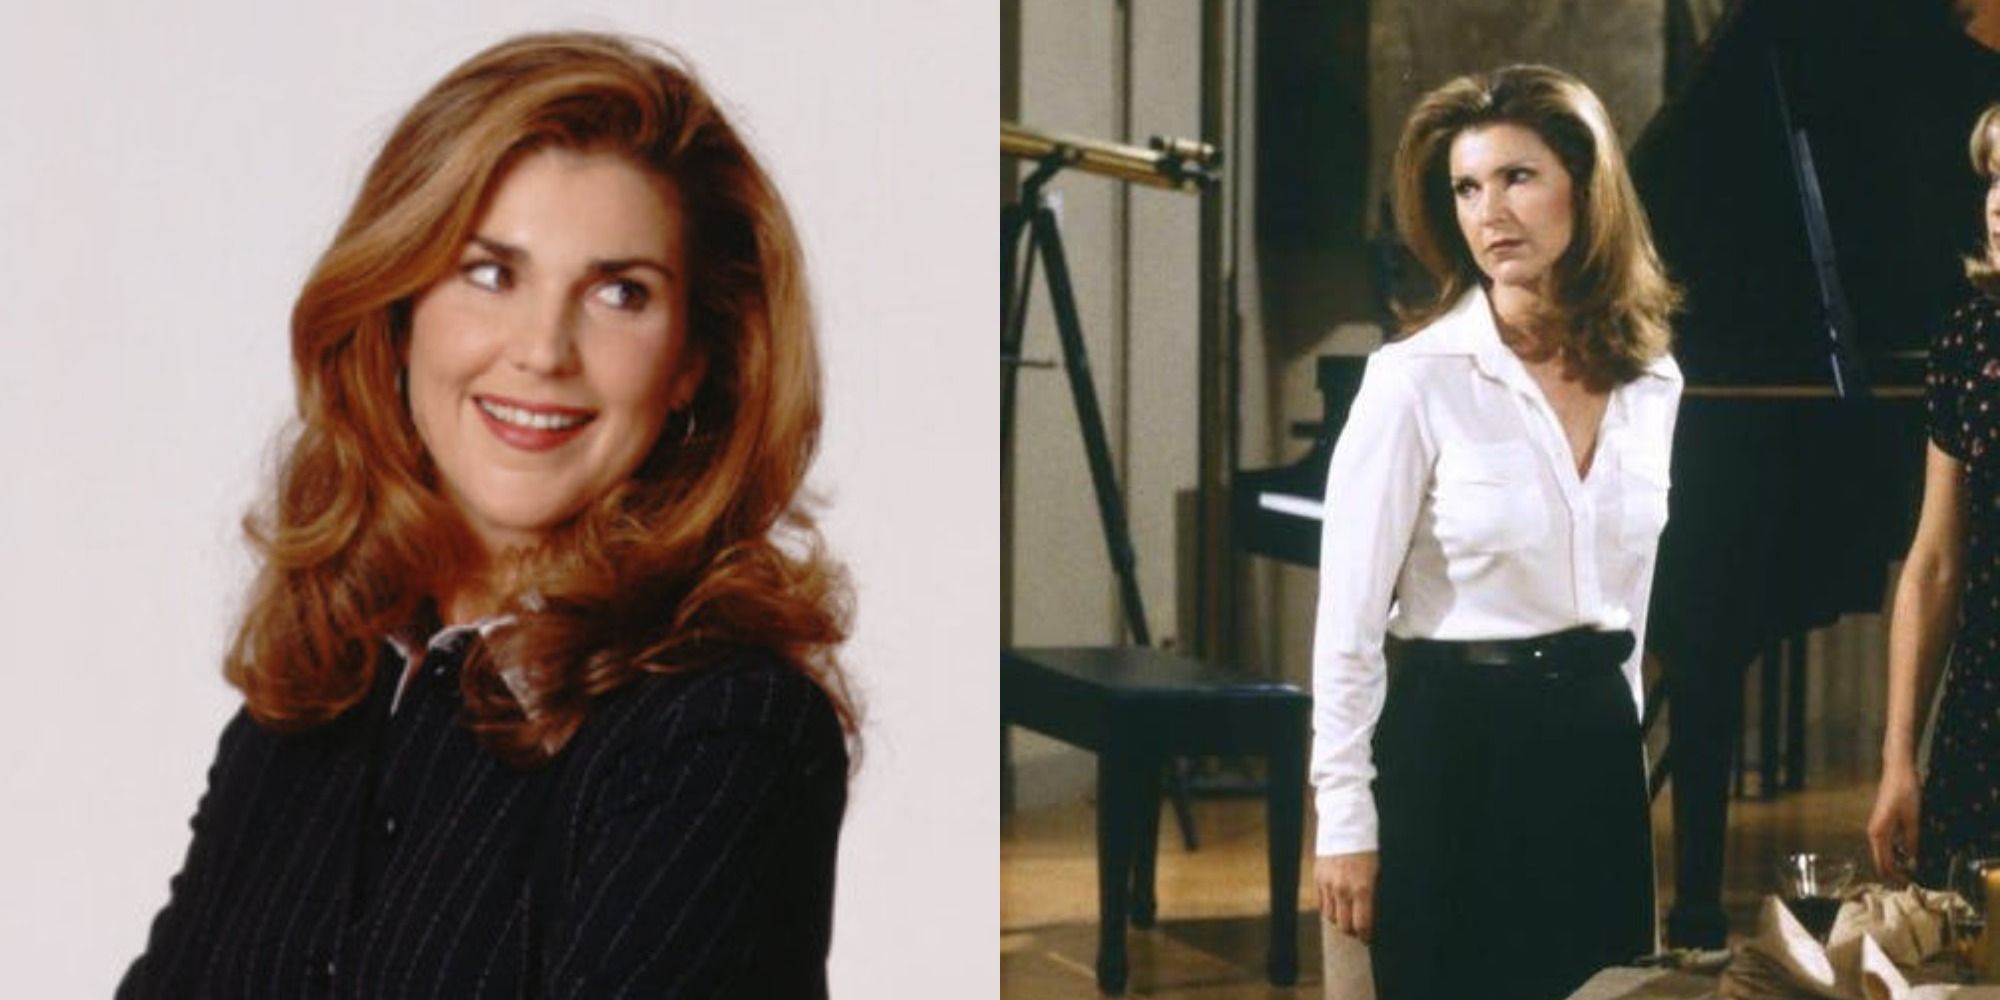 Split image showing Roz from Frasier in a promo image for the show and in Frasier's apartment